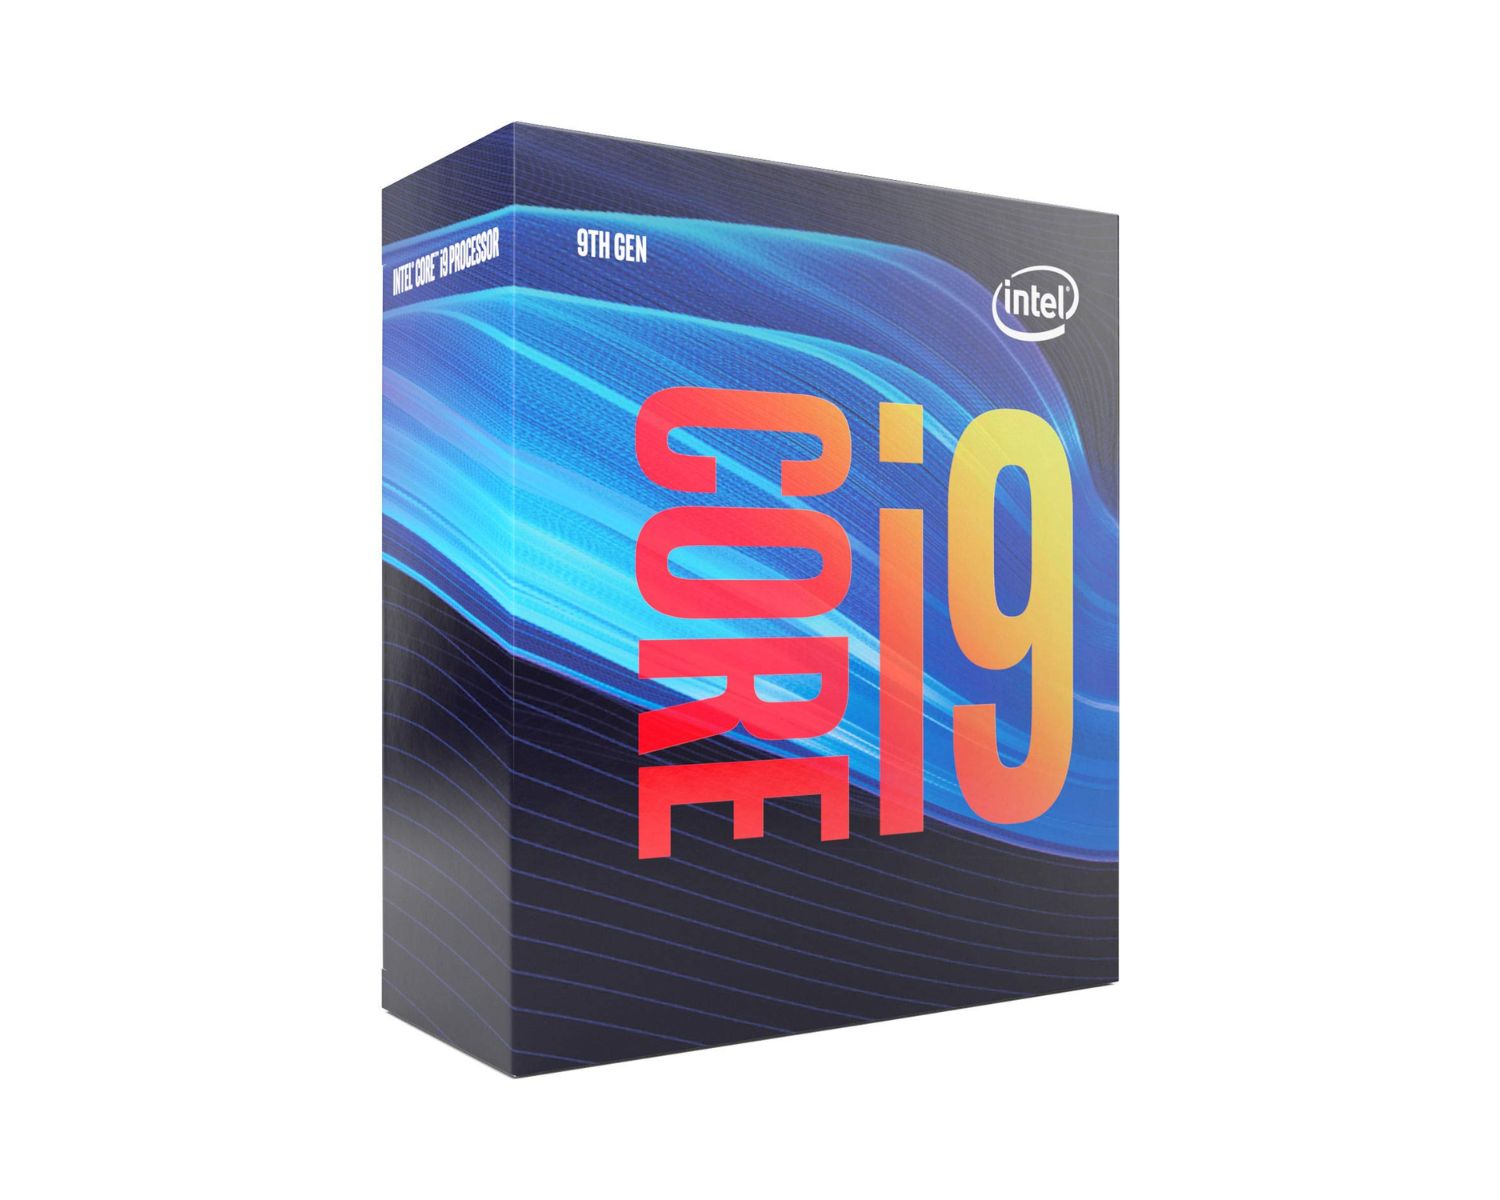 16-extraordinary-facts-about-intel-core-i9-9900-3-10ghz